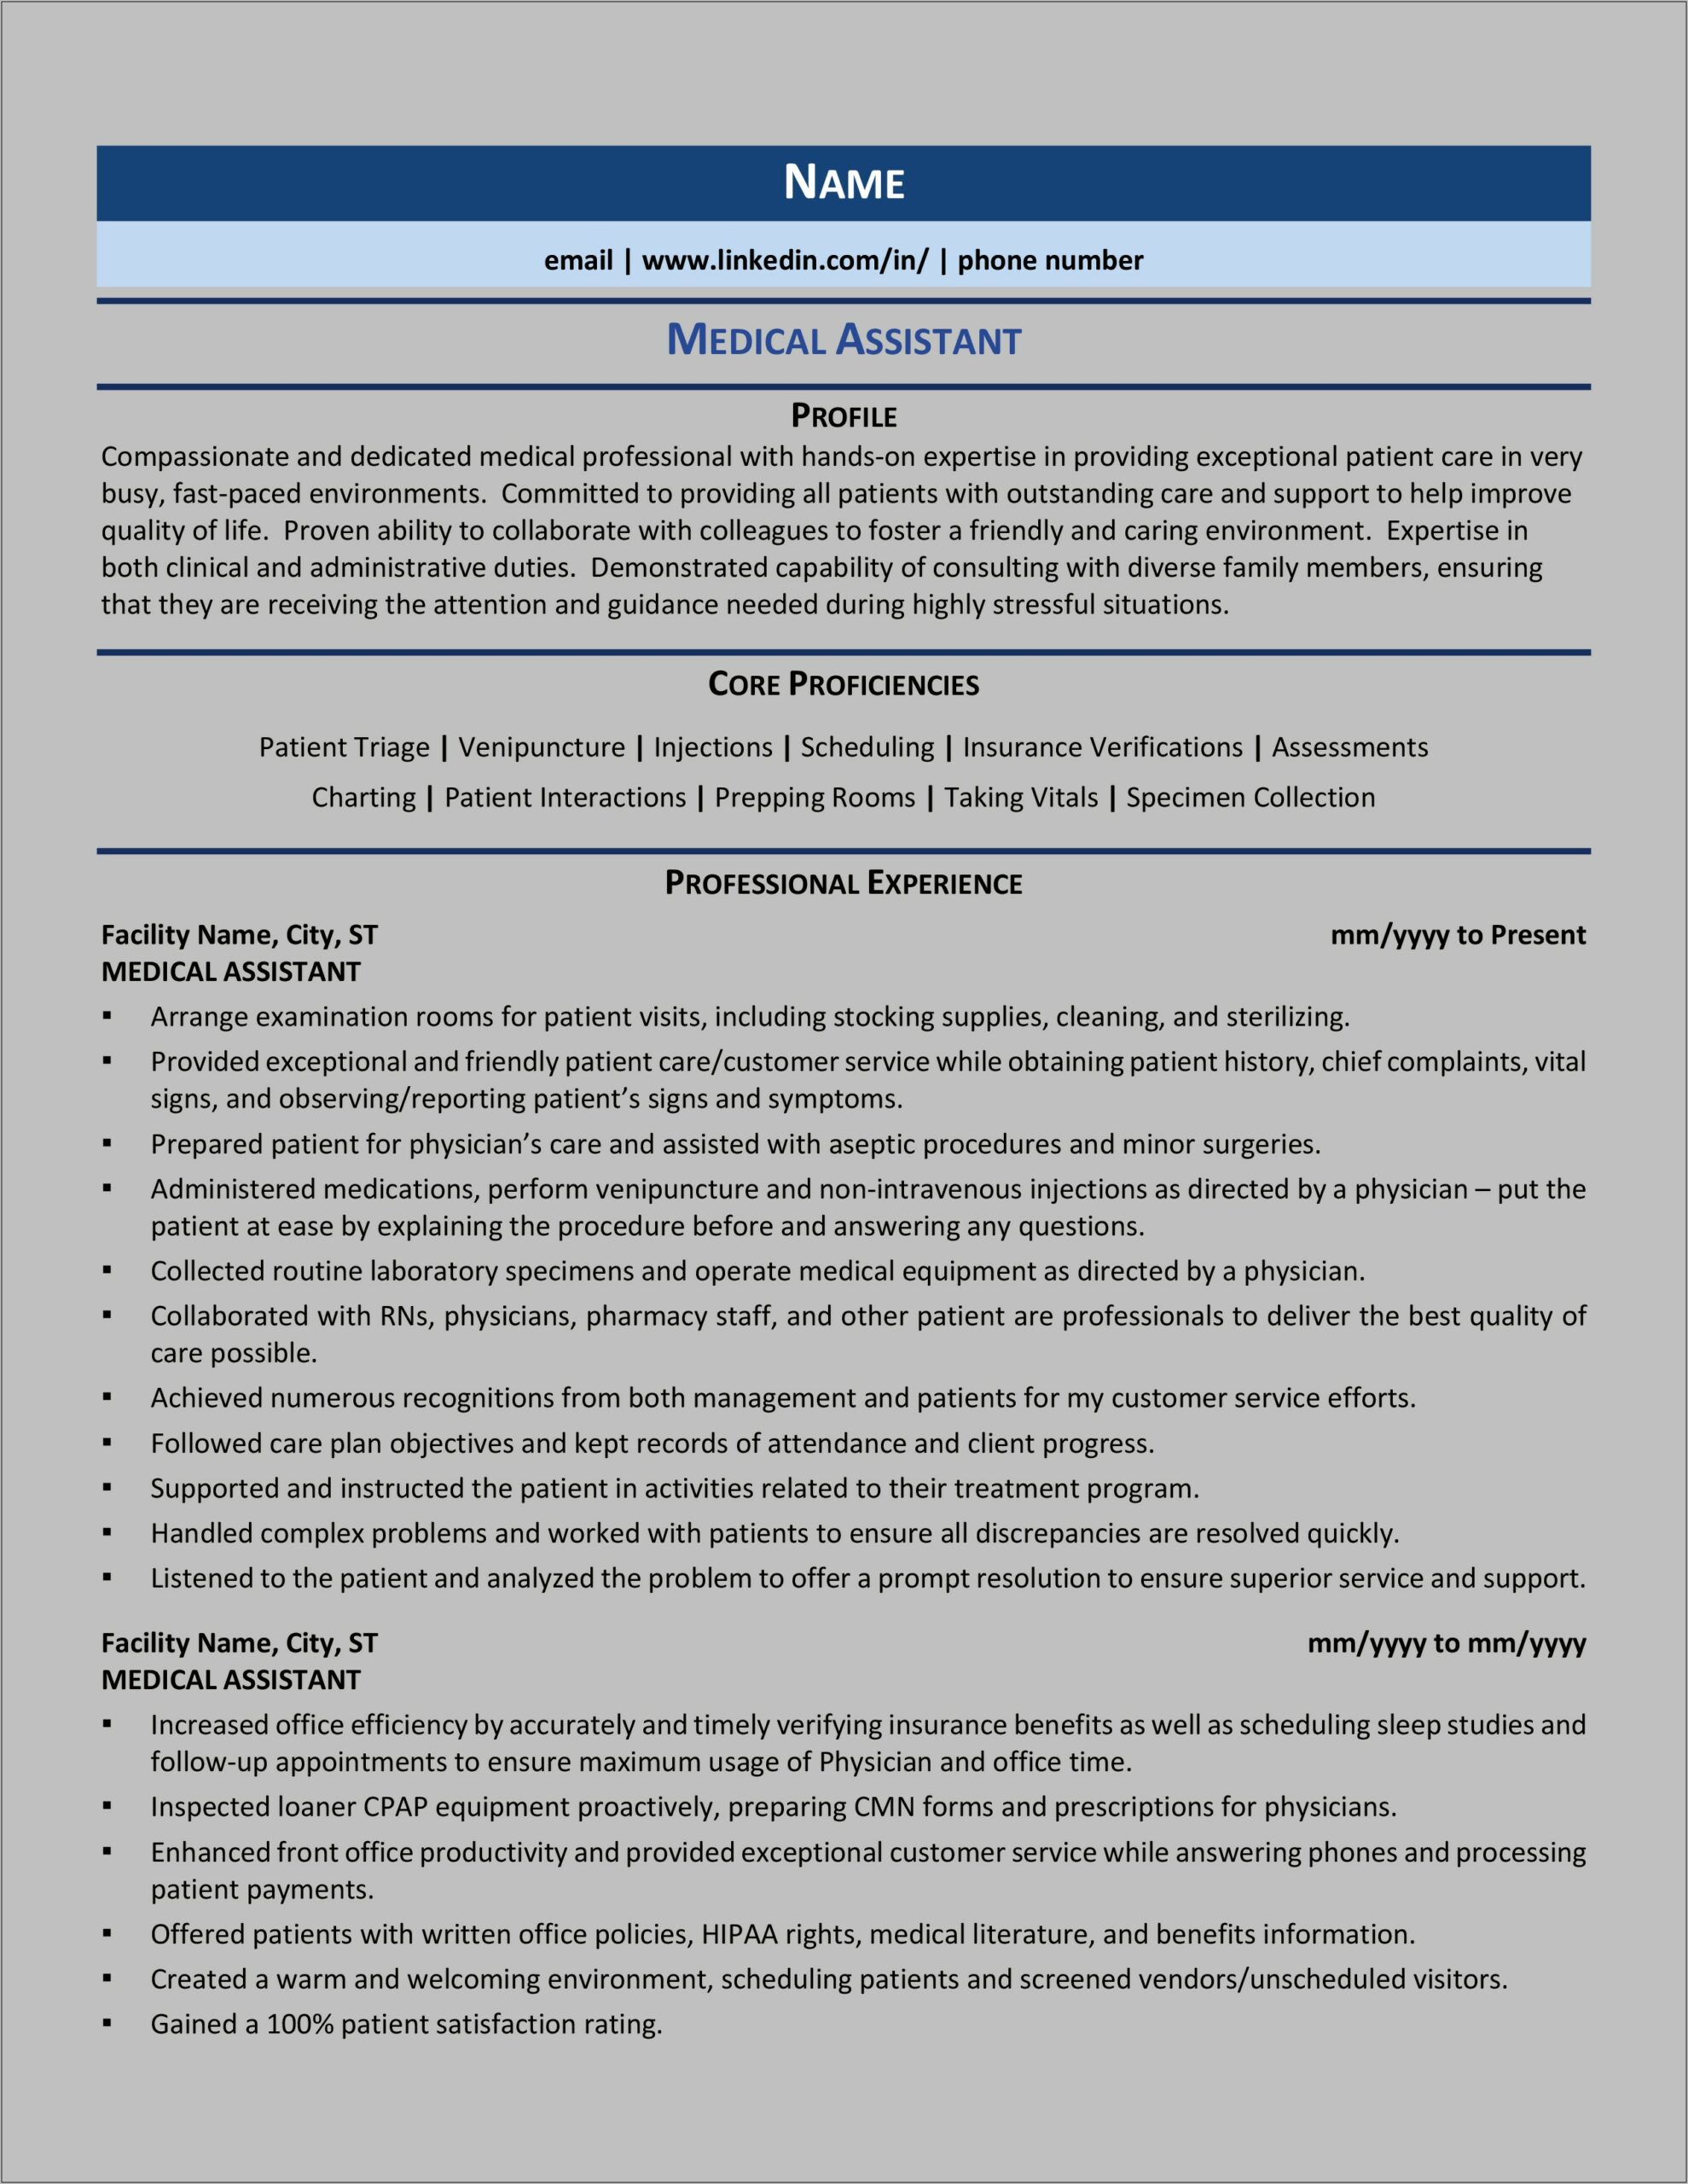 A Good Summary For A Medical Assistant Resume